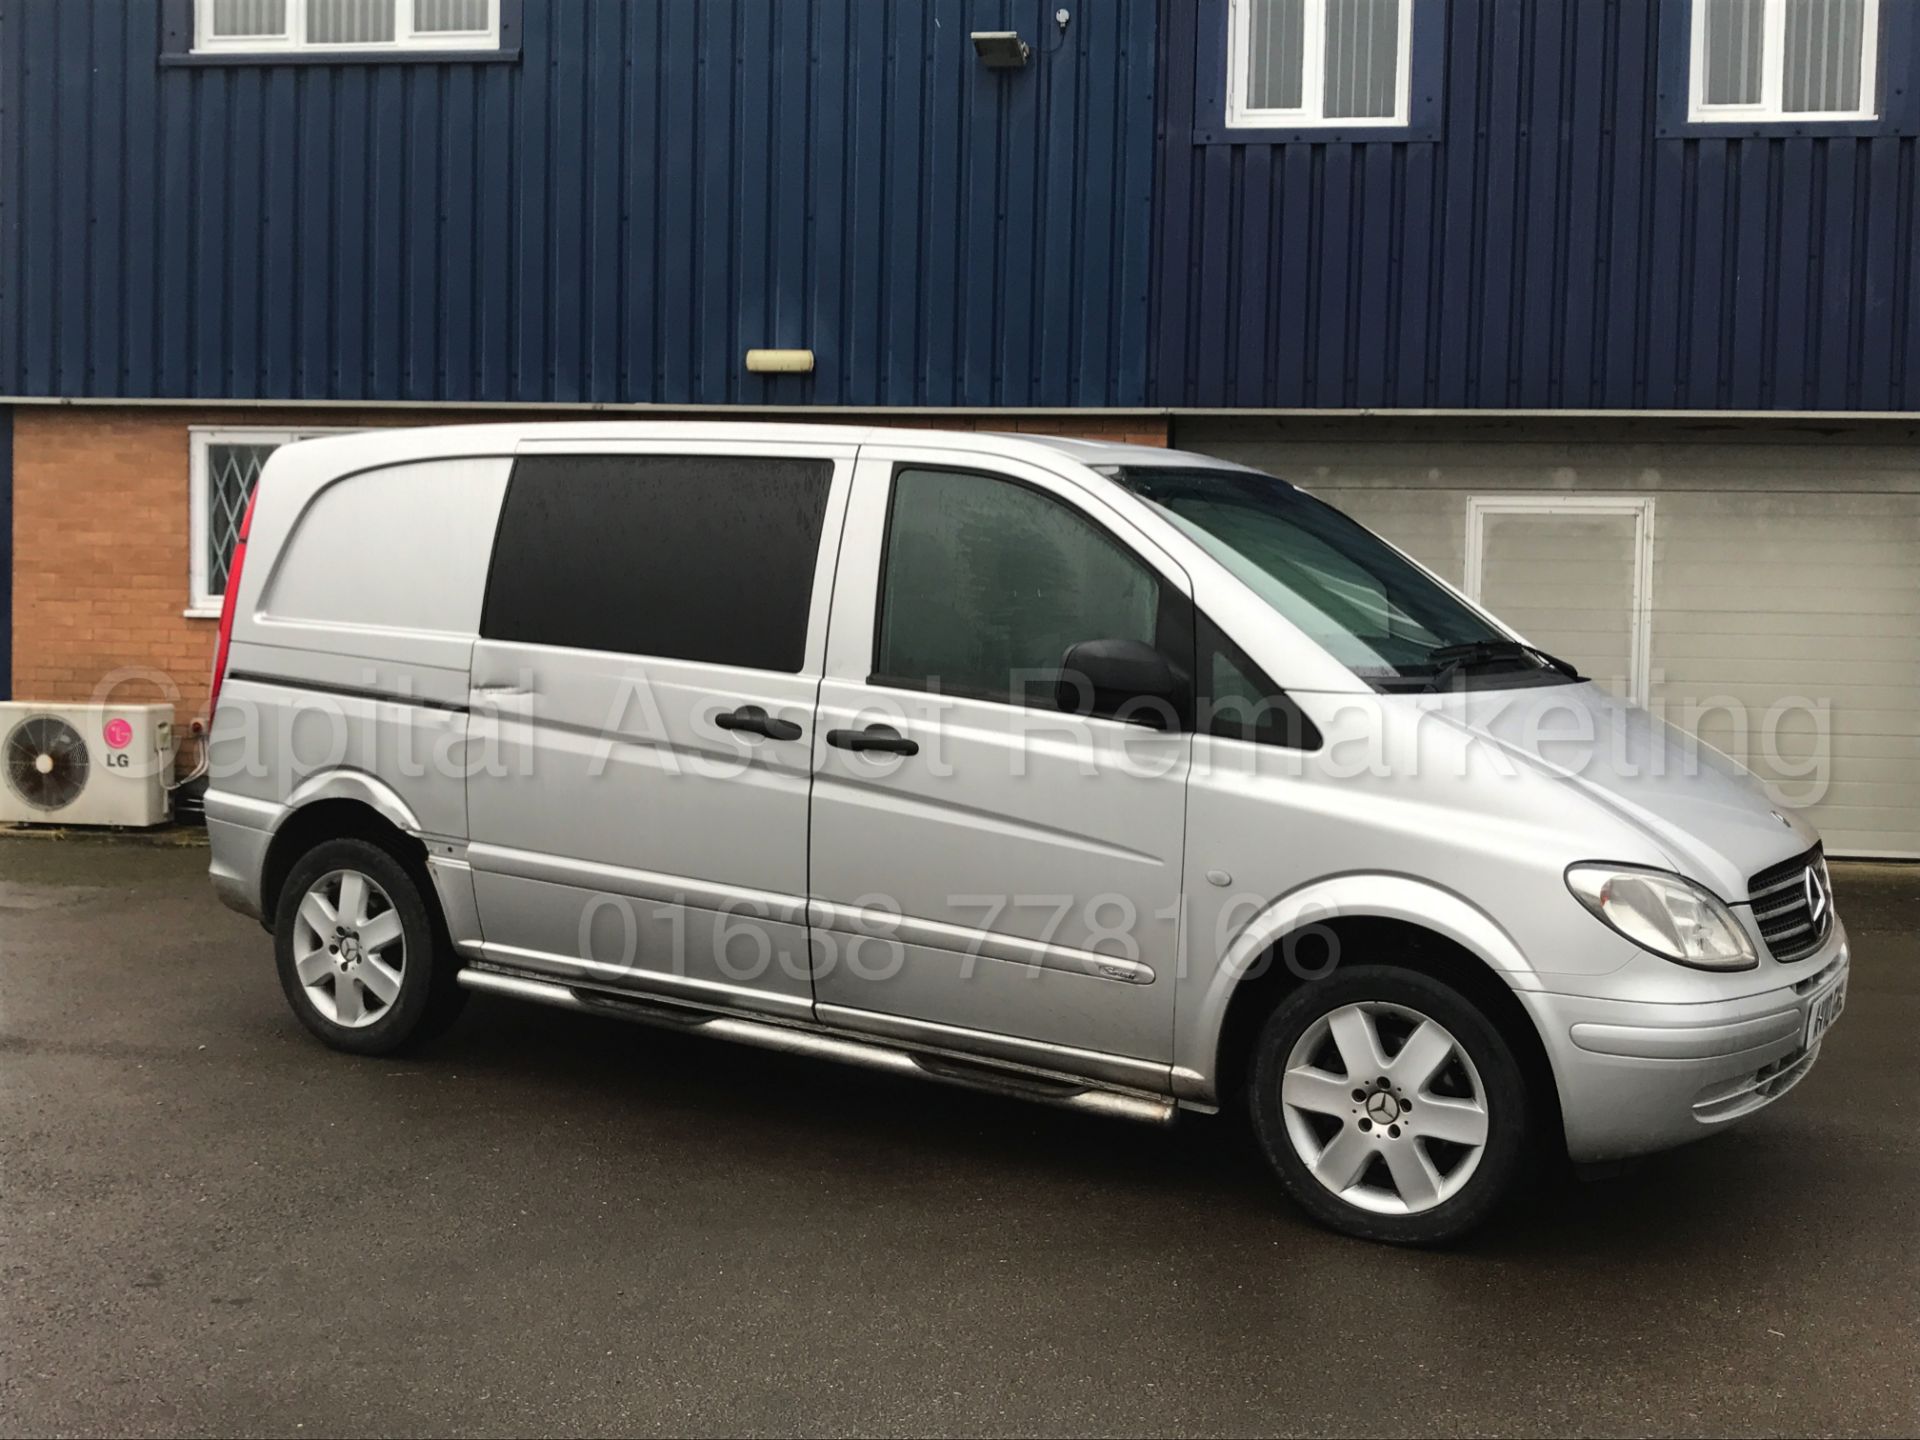 MERCEDES VITO *SPORT* '5 SEATER DUELINER' (2010 - 10 REG) '2.1 CDI - 150 BHP - 6 SPEED' **AIR CON** - Image 10 of 35